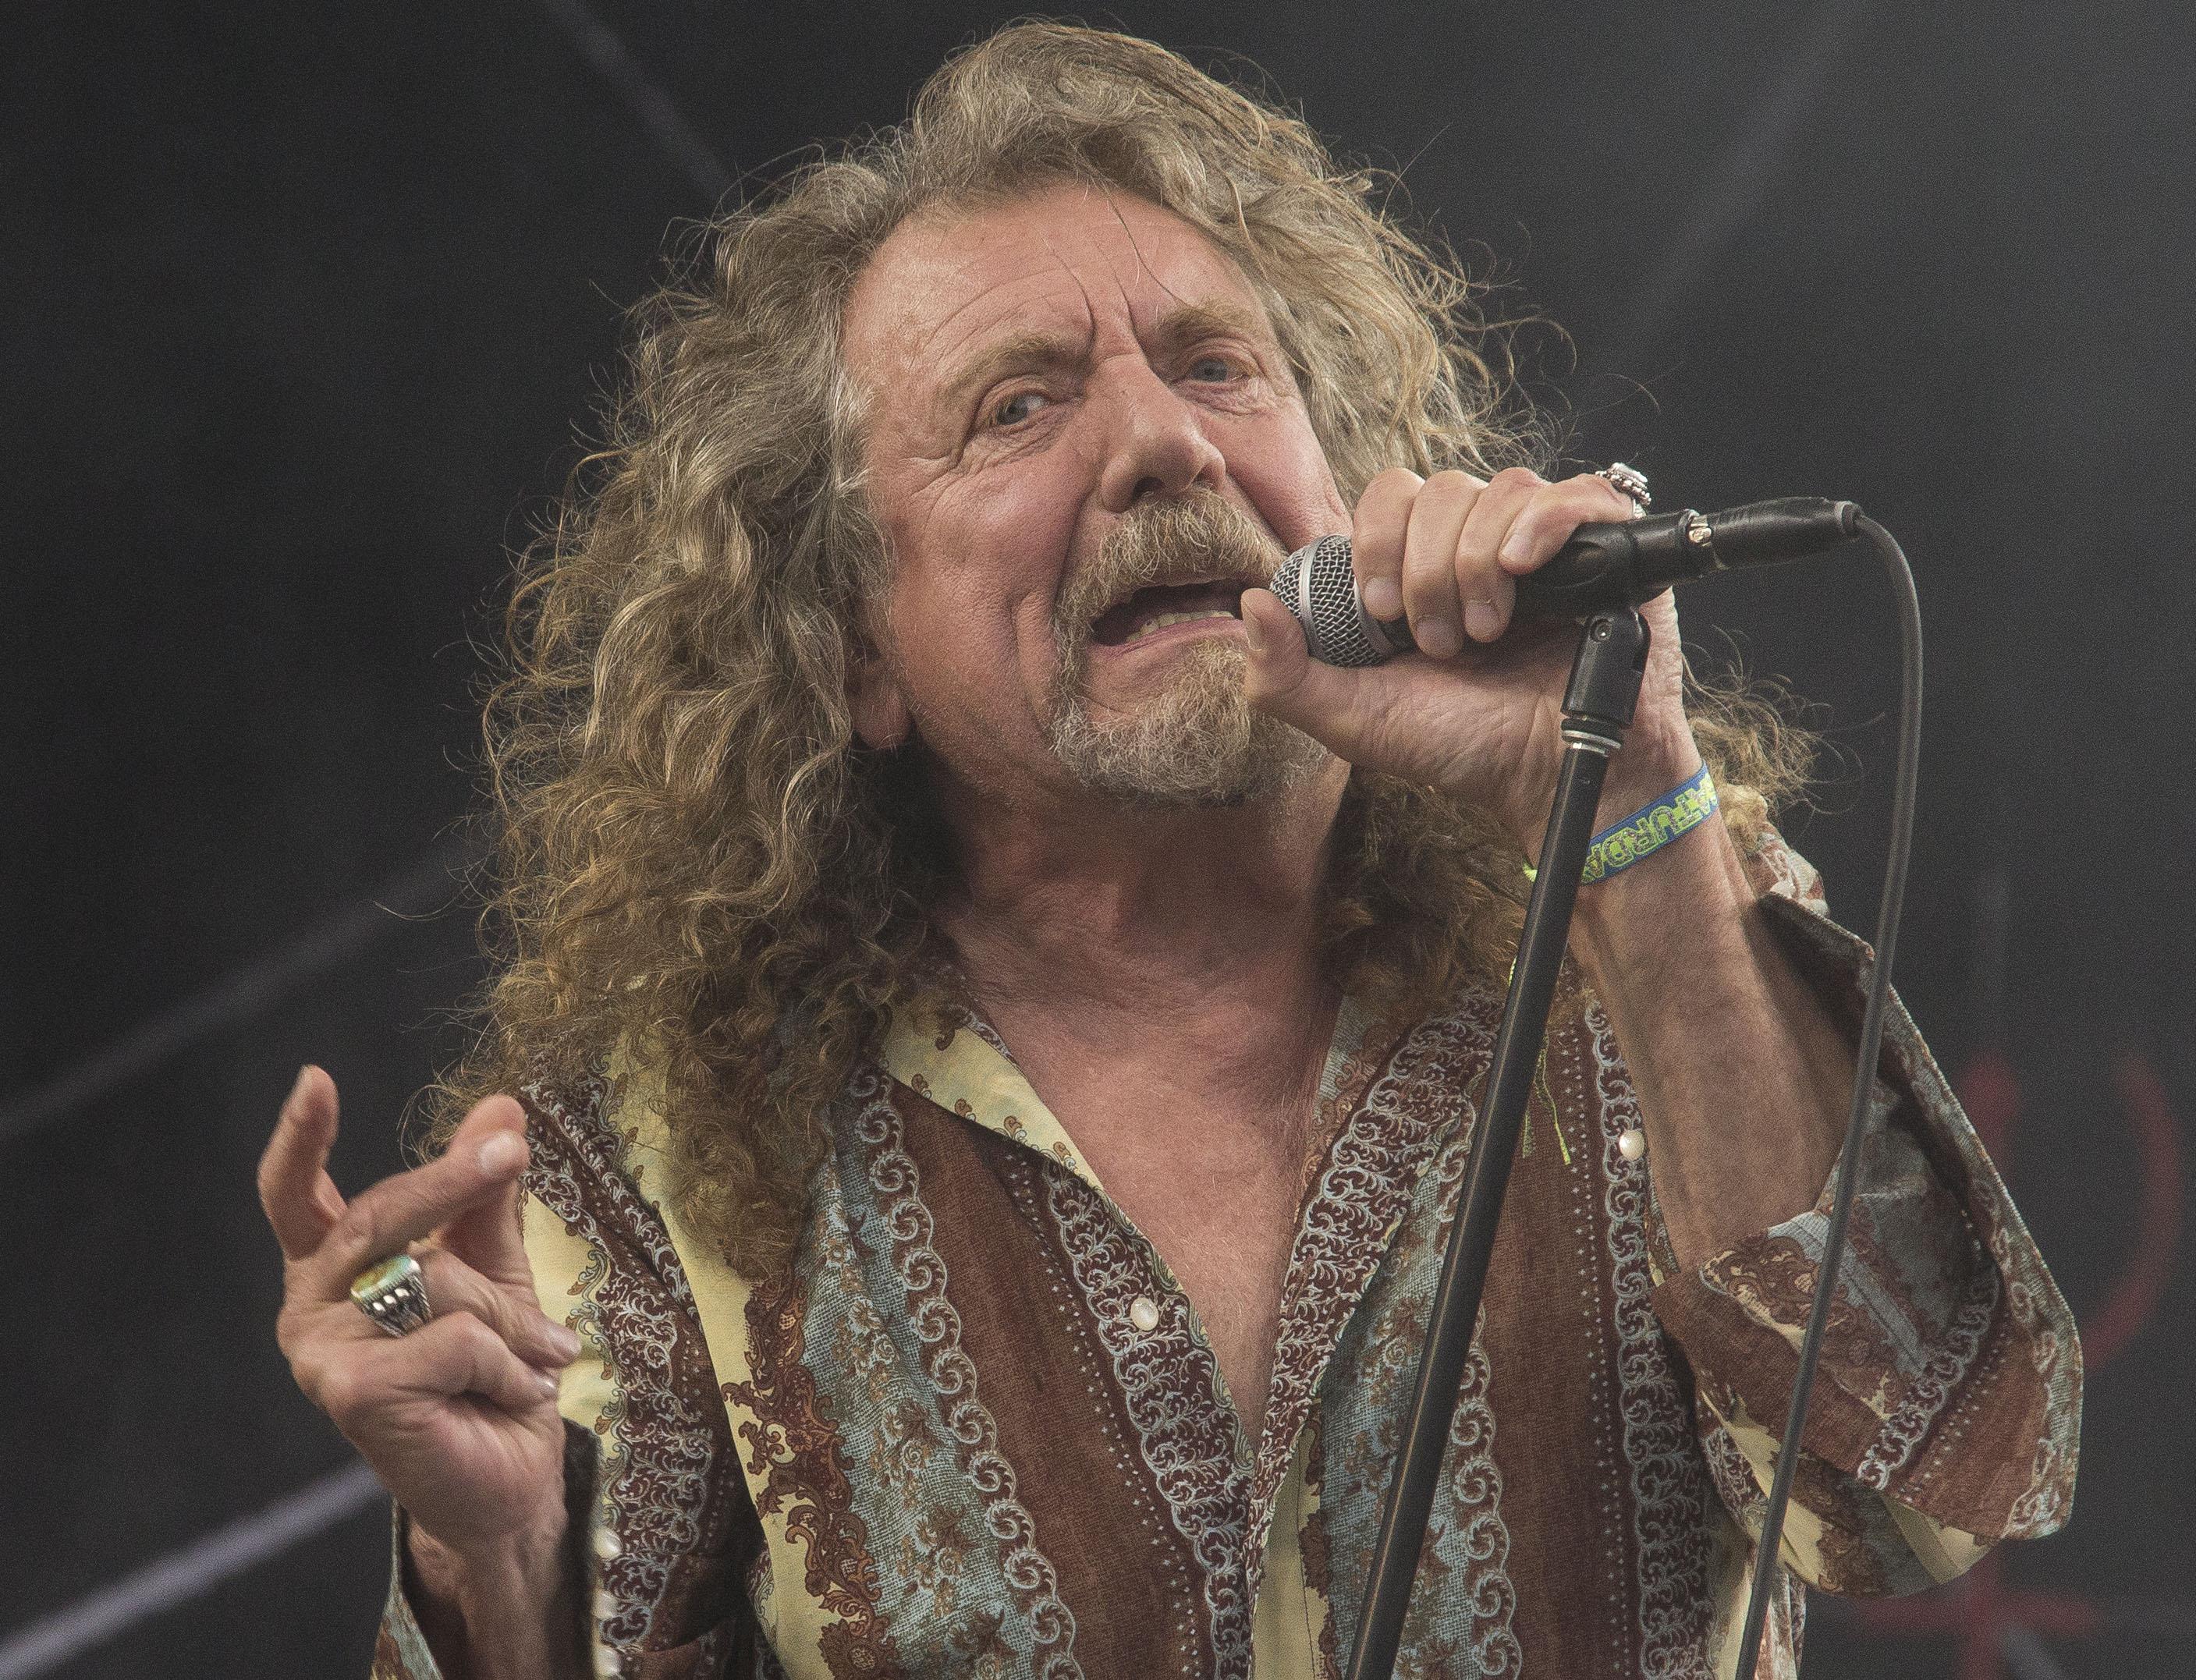 Robert Plant announces Sept. 29 show at the FICA The SpokesmanReview